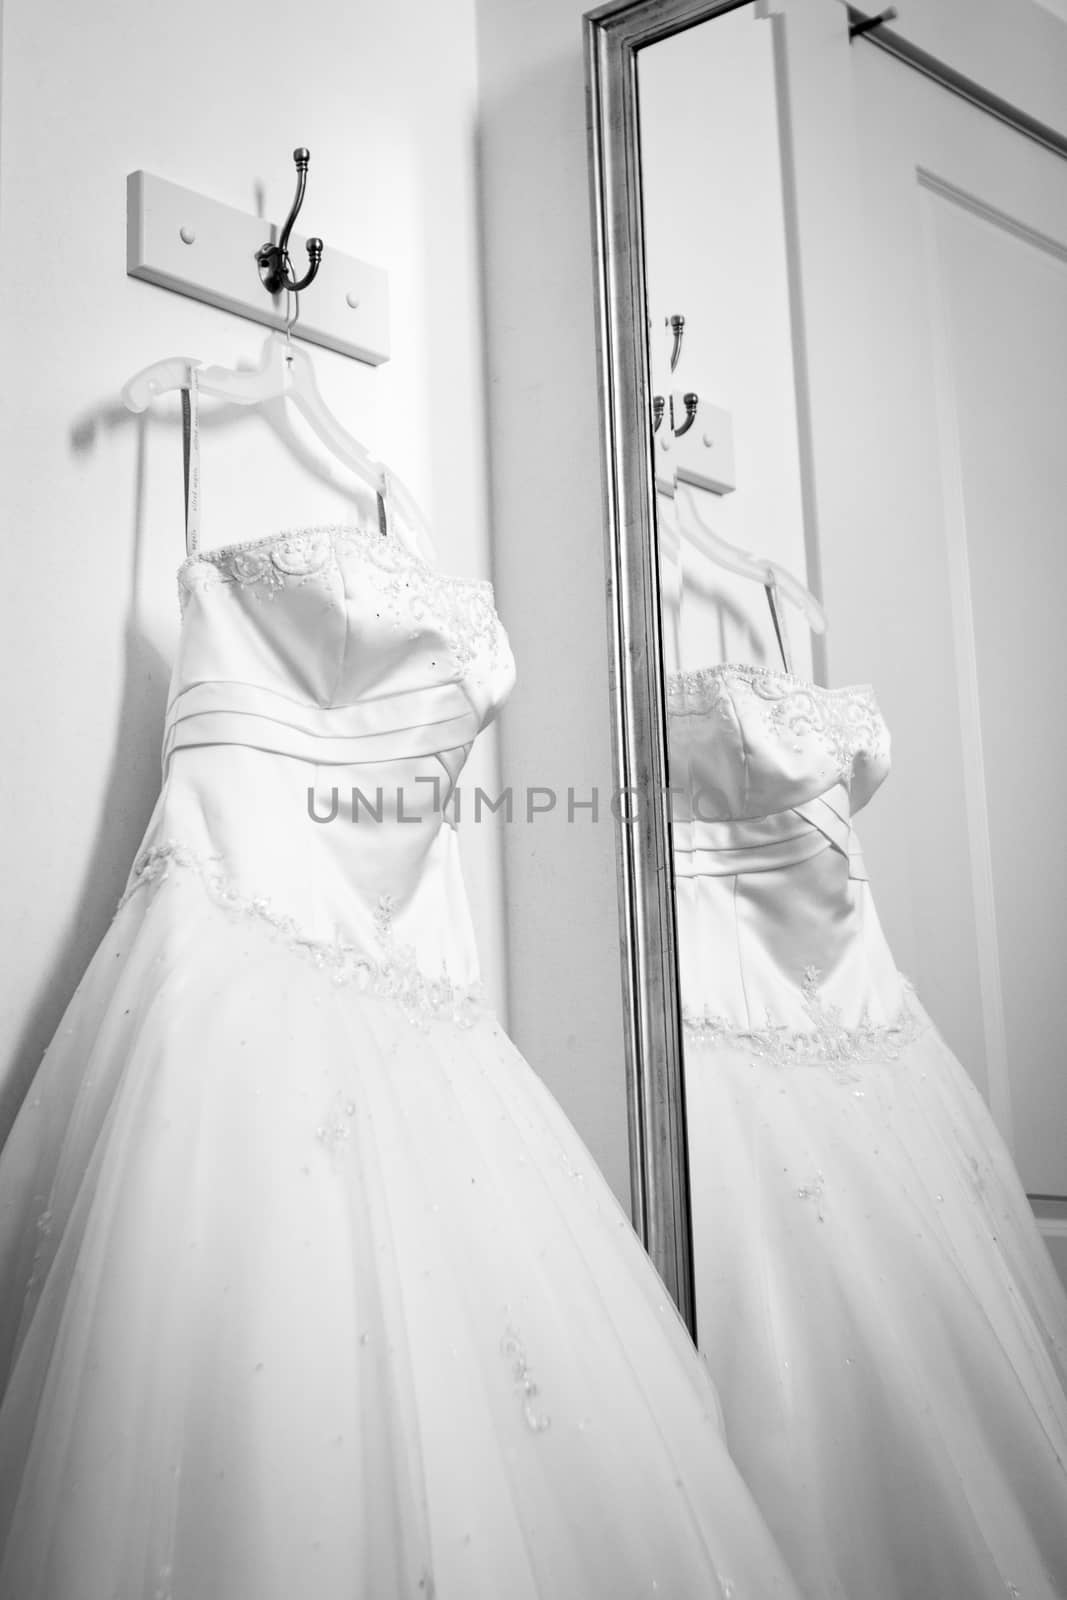 Black and white wedding dress reflected in a mirror. by salejandro